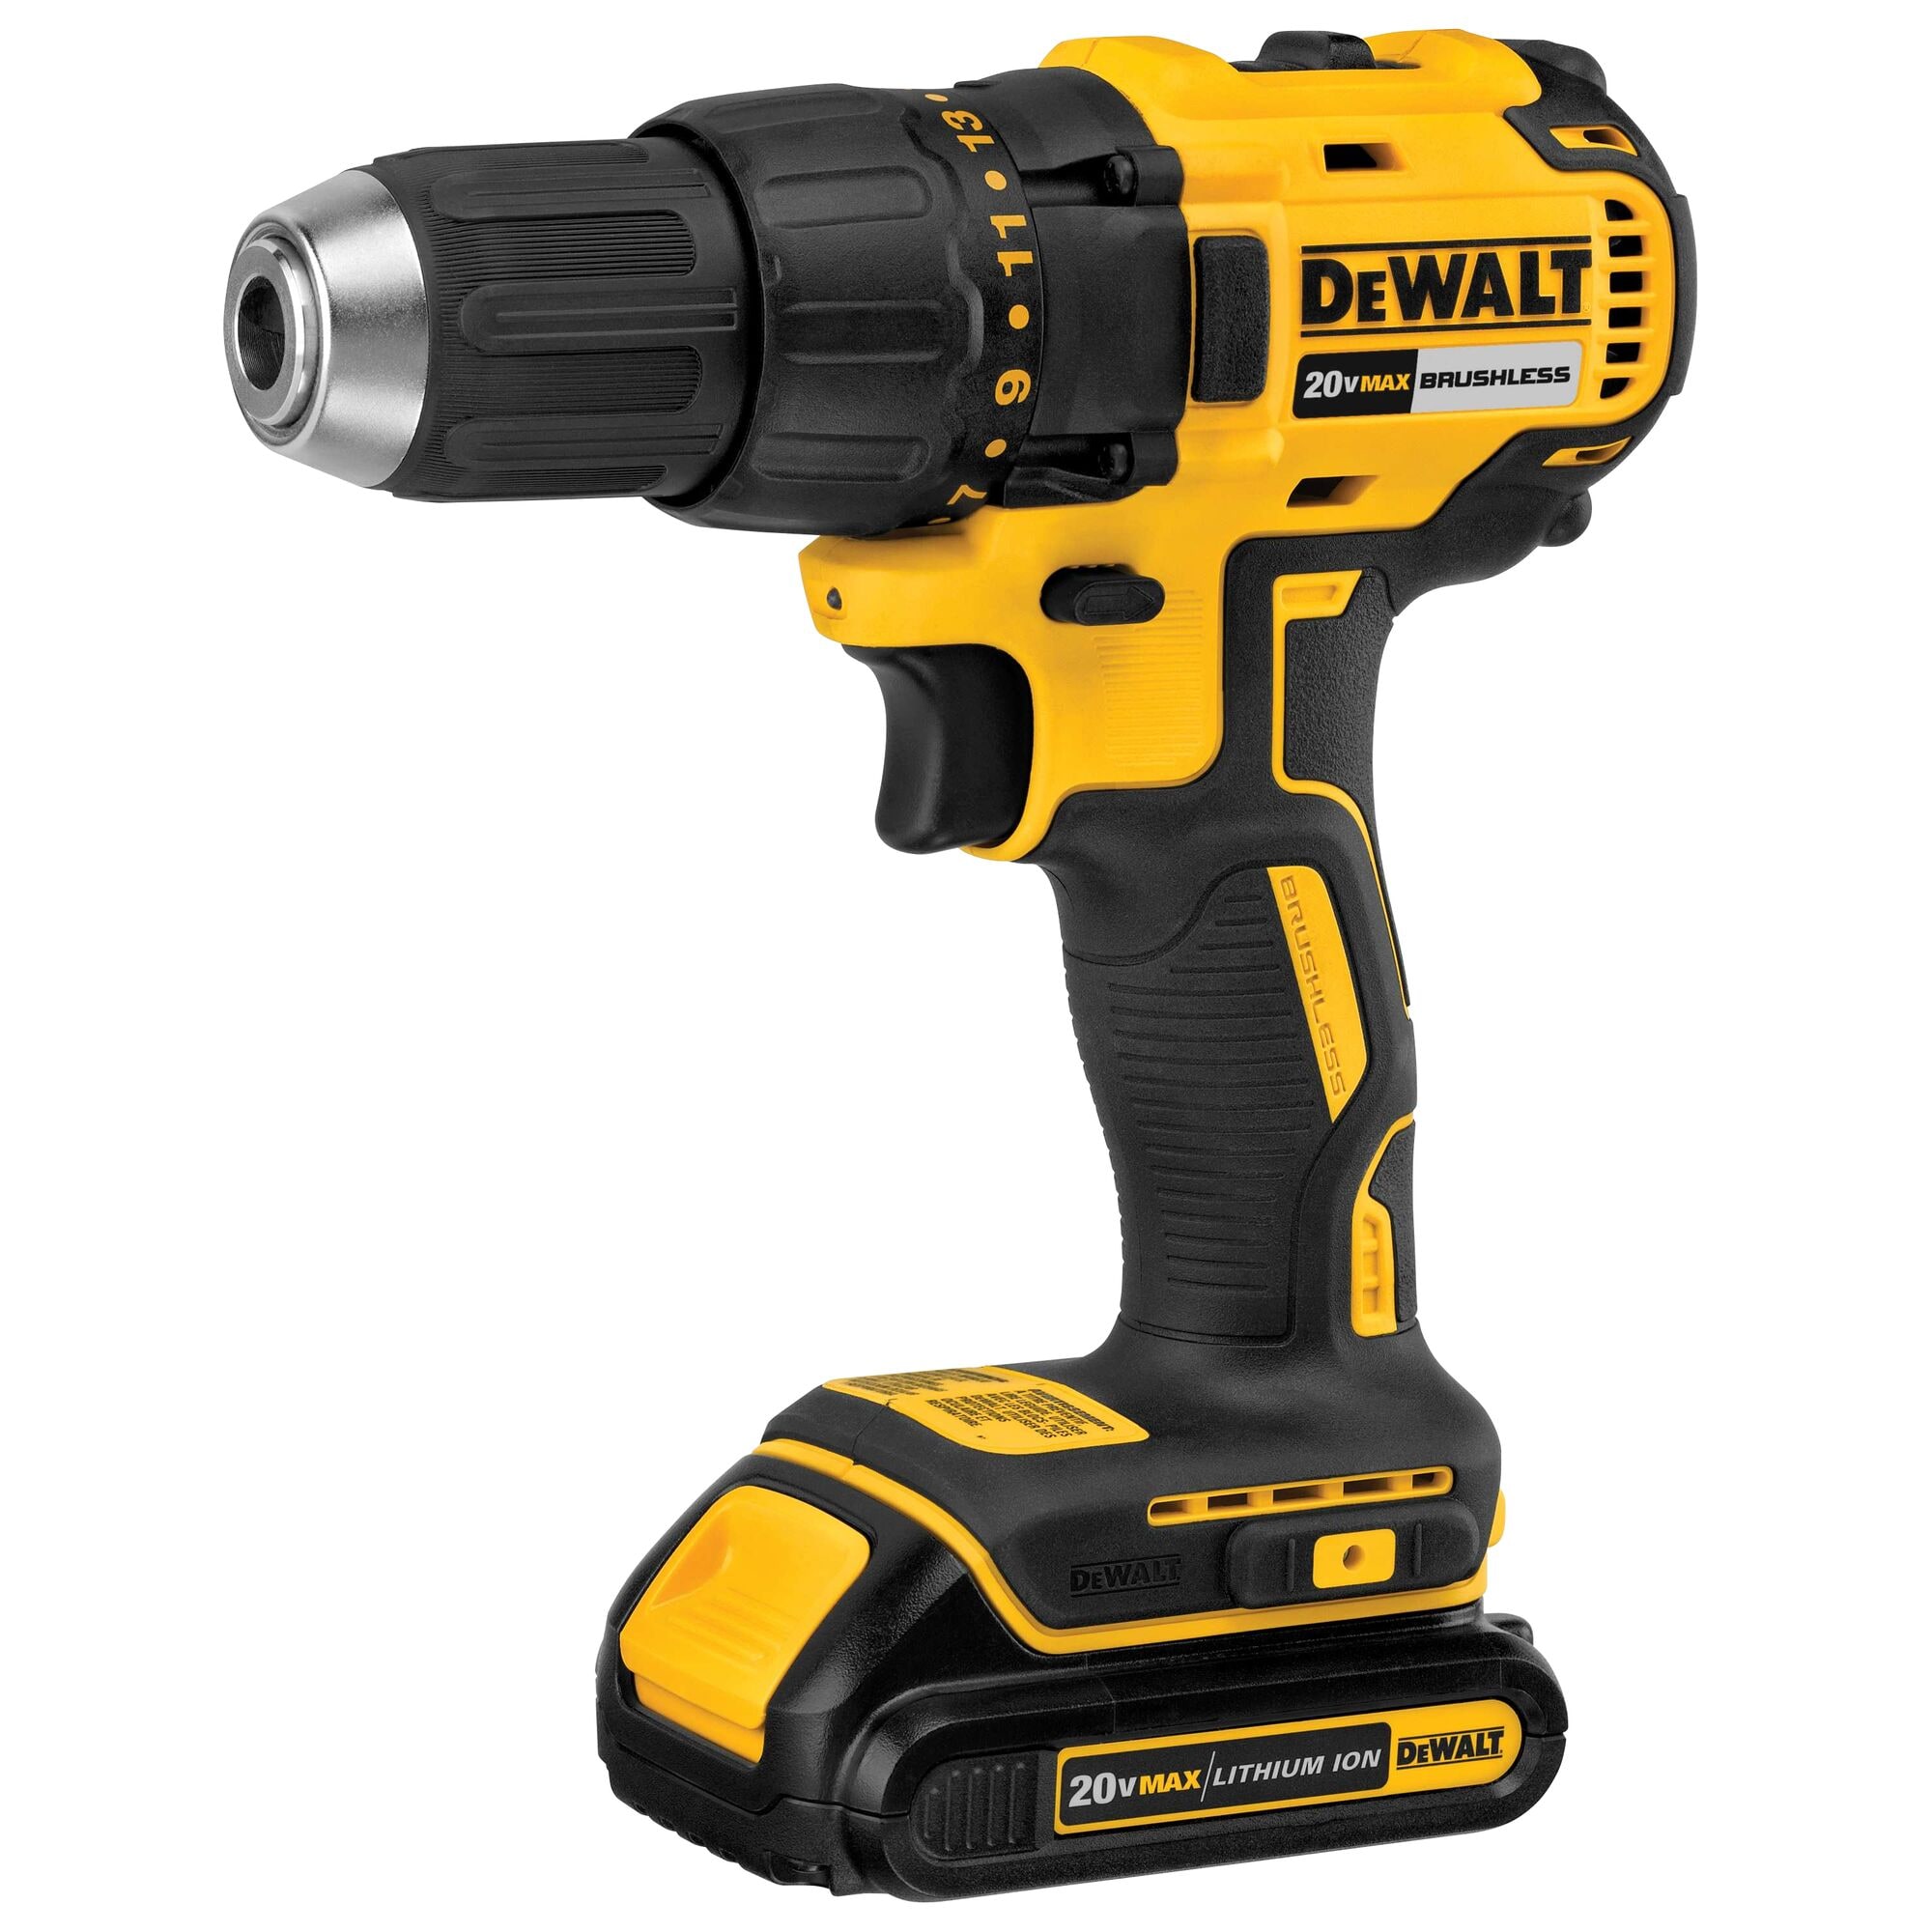 DEWALT 20-volt Max 1/2-in Brushless Cordless Drill(2 Batteries Included and Charger Included) the Drills department at Lowes.com